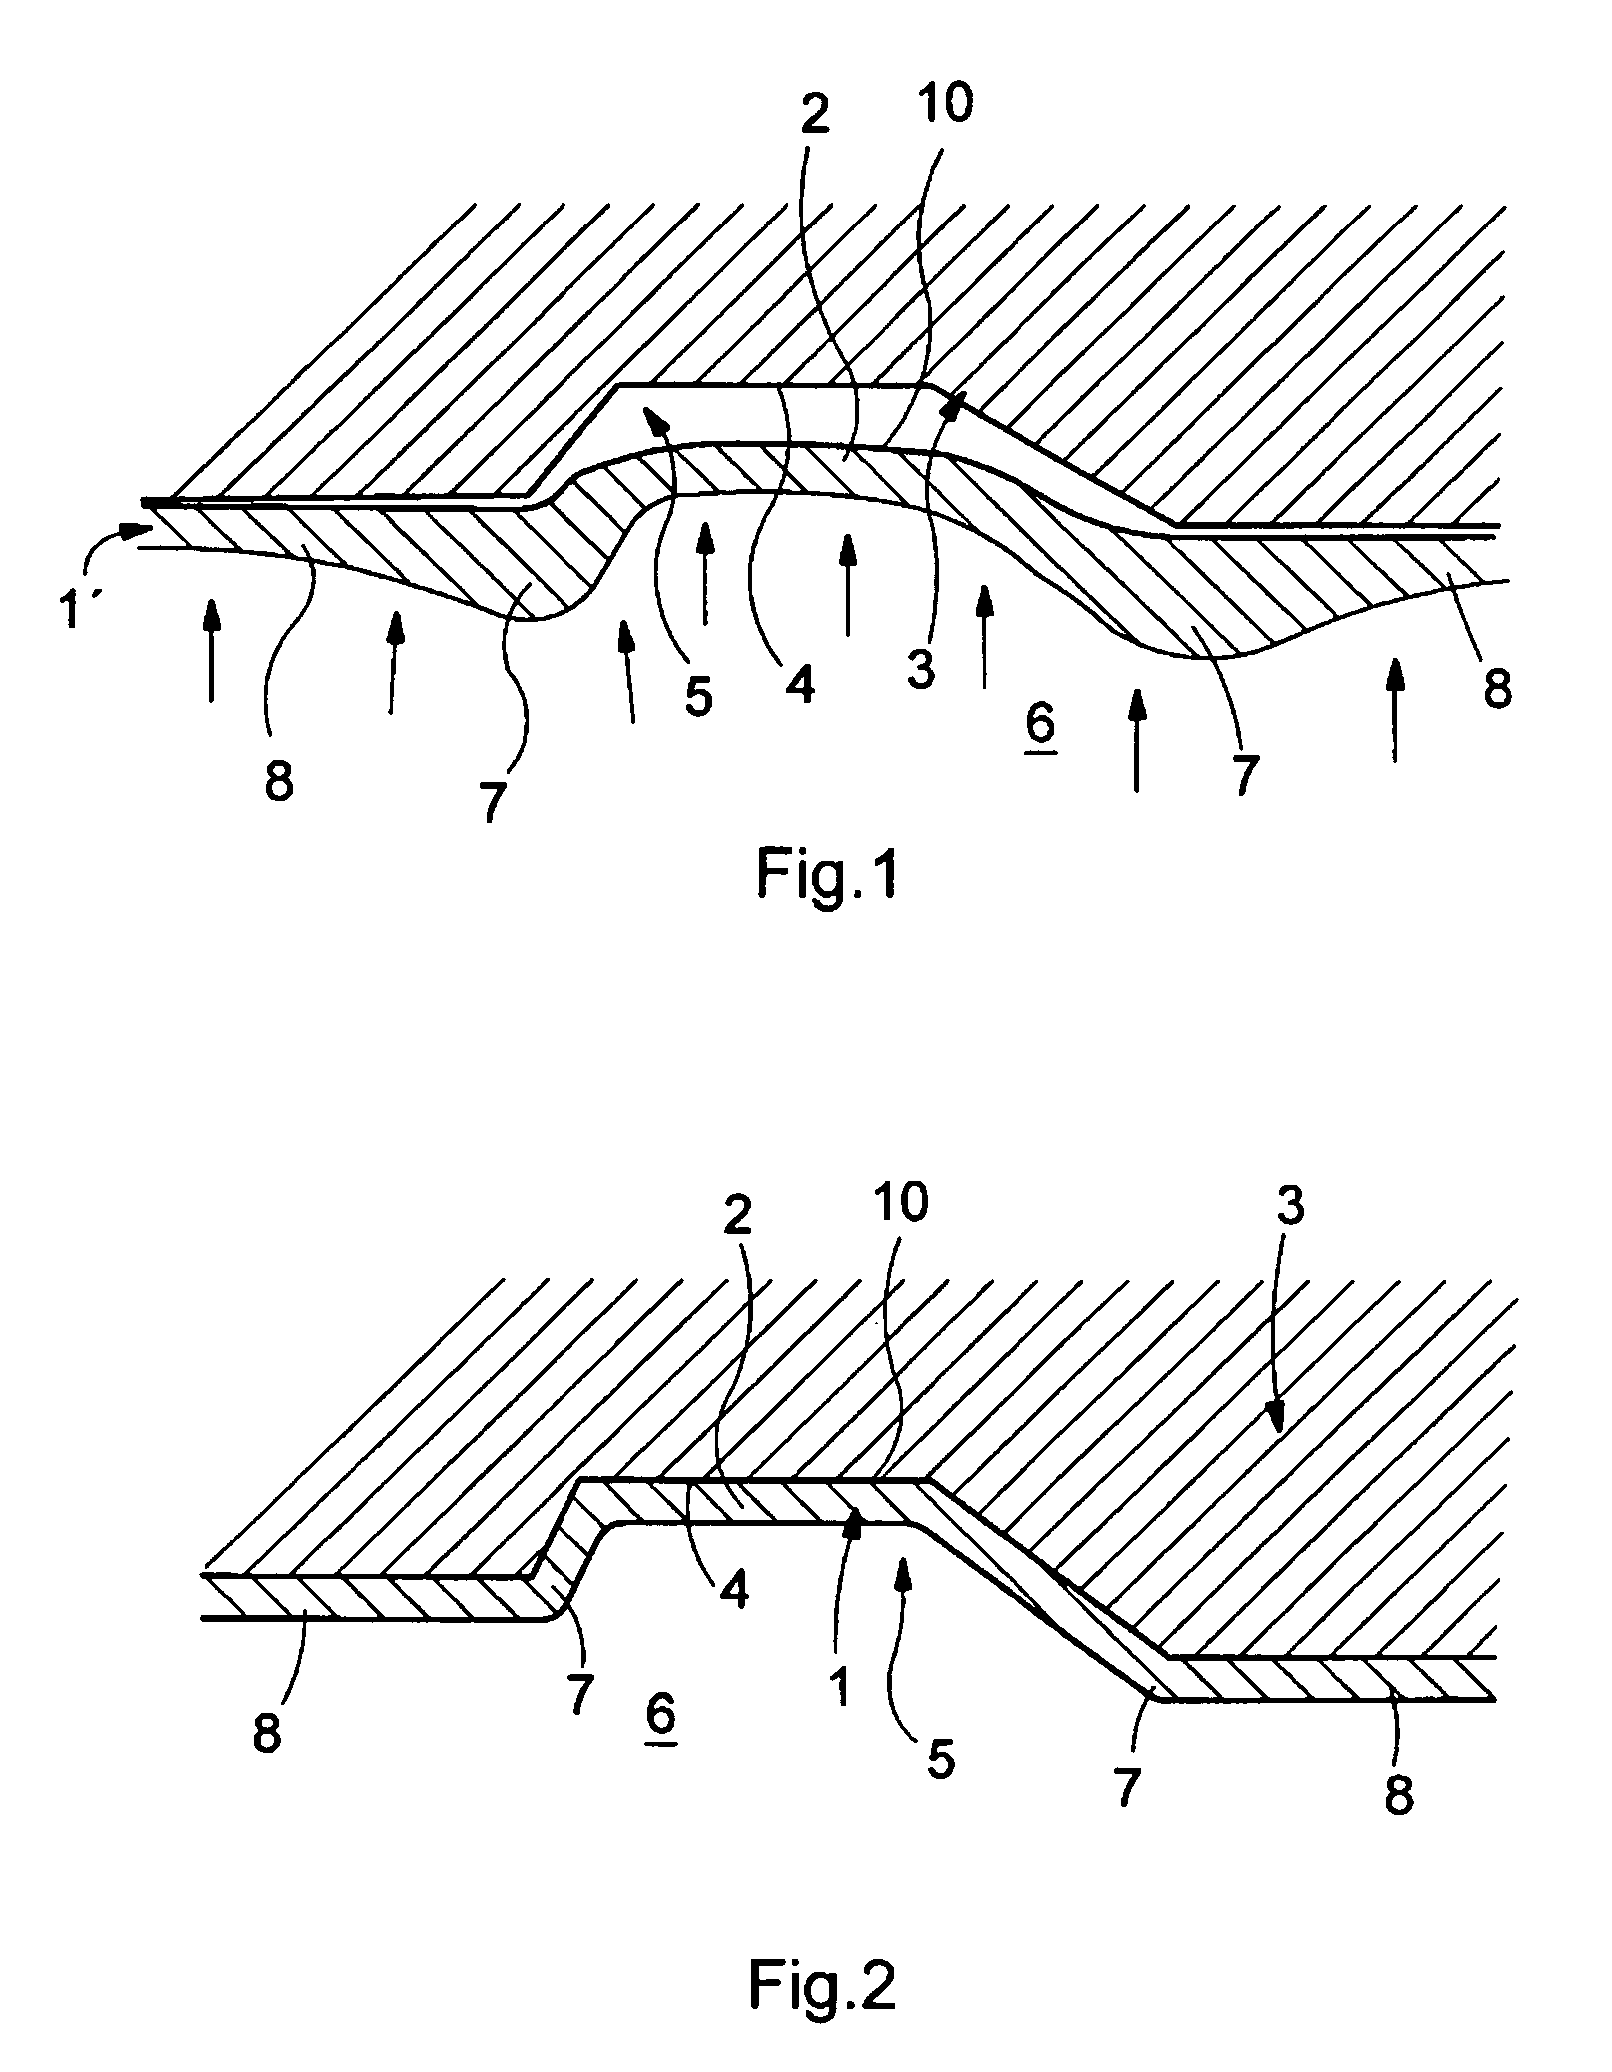 Process for producing hollow metal articles